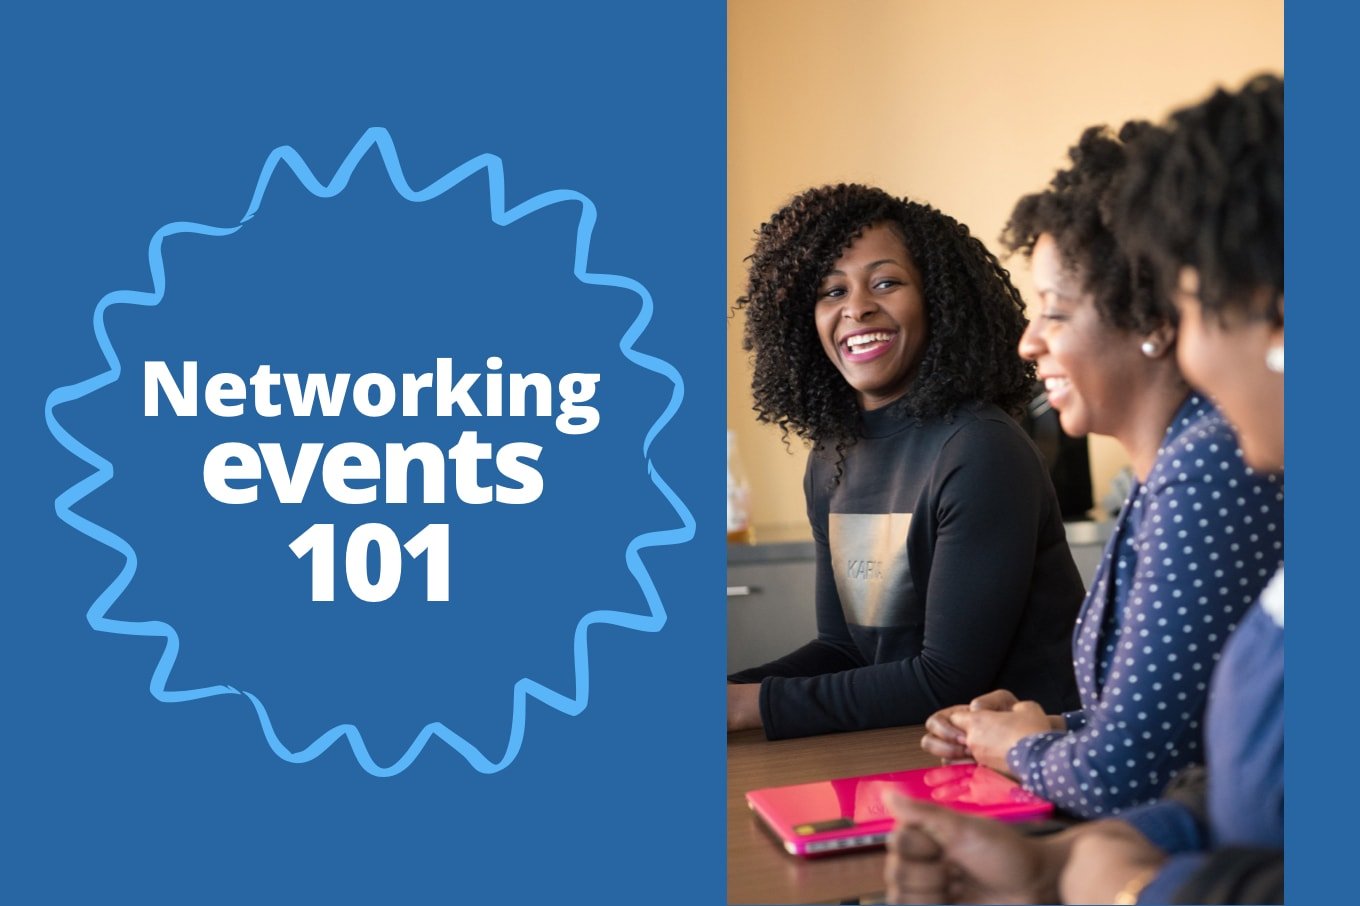 5 Ways to Get More Out of Networking Events as a Newbie